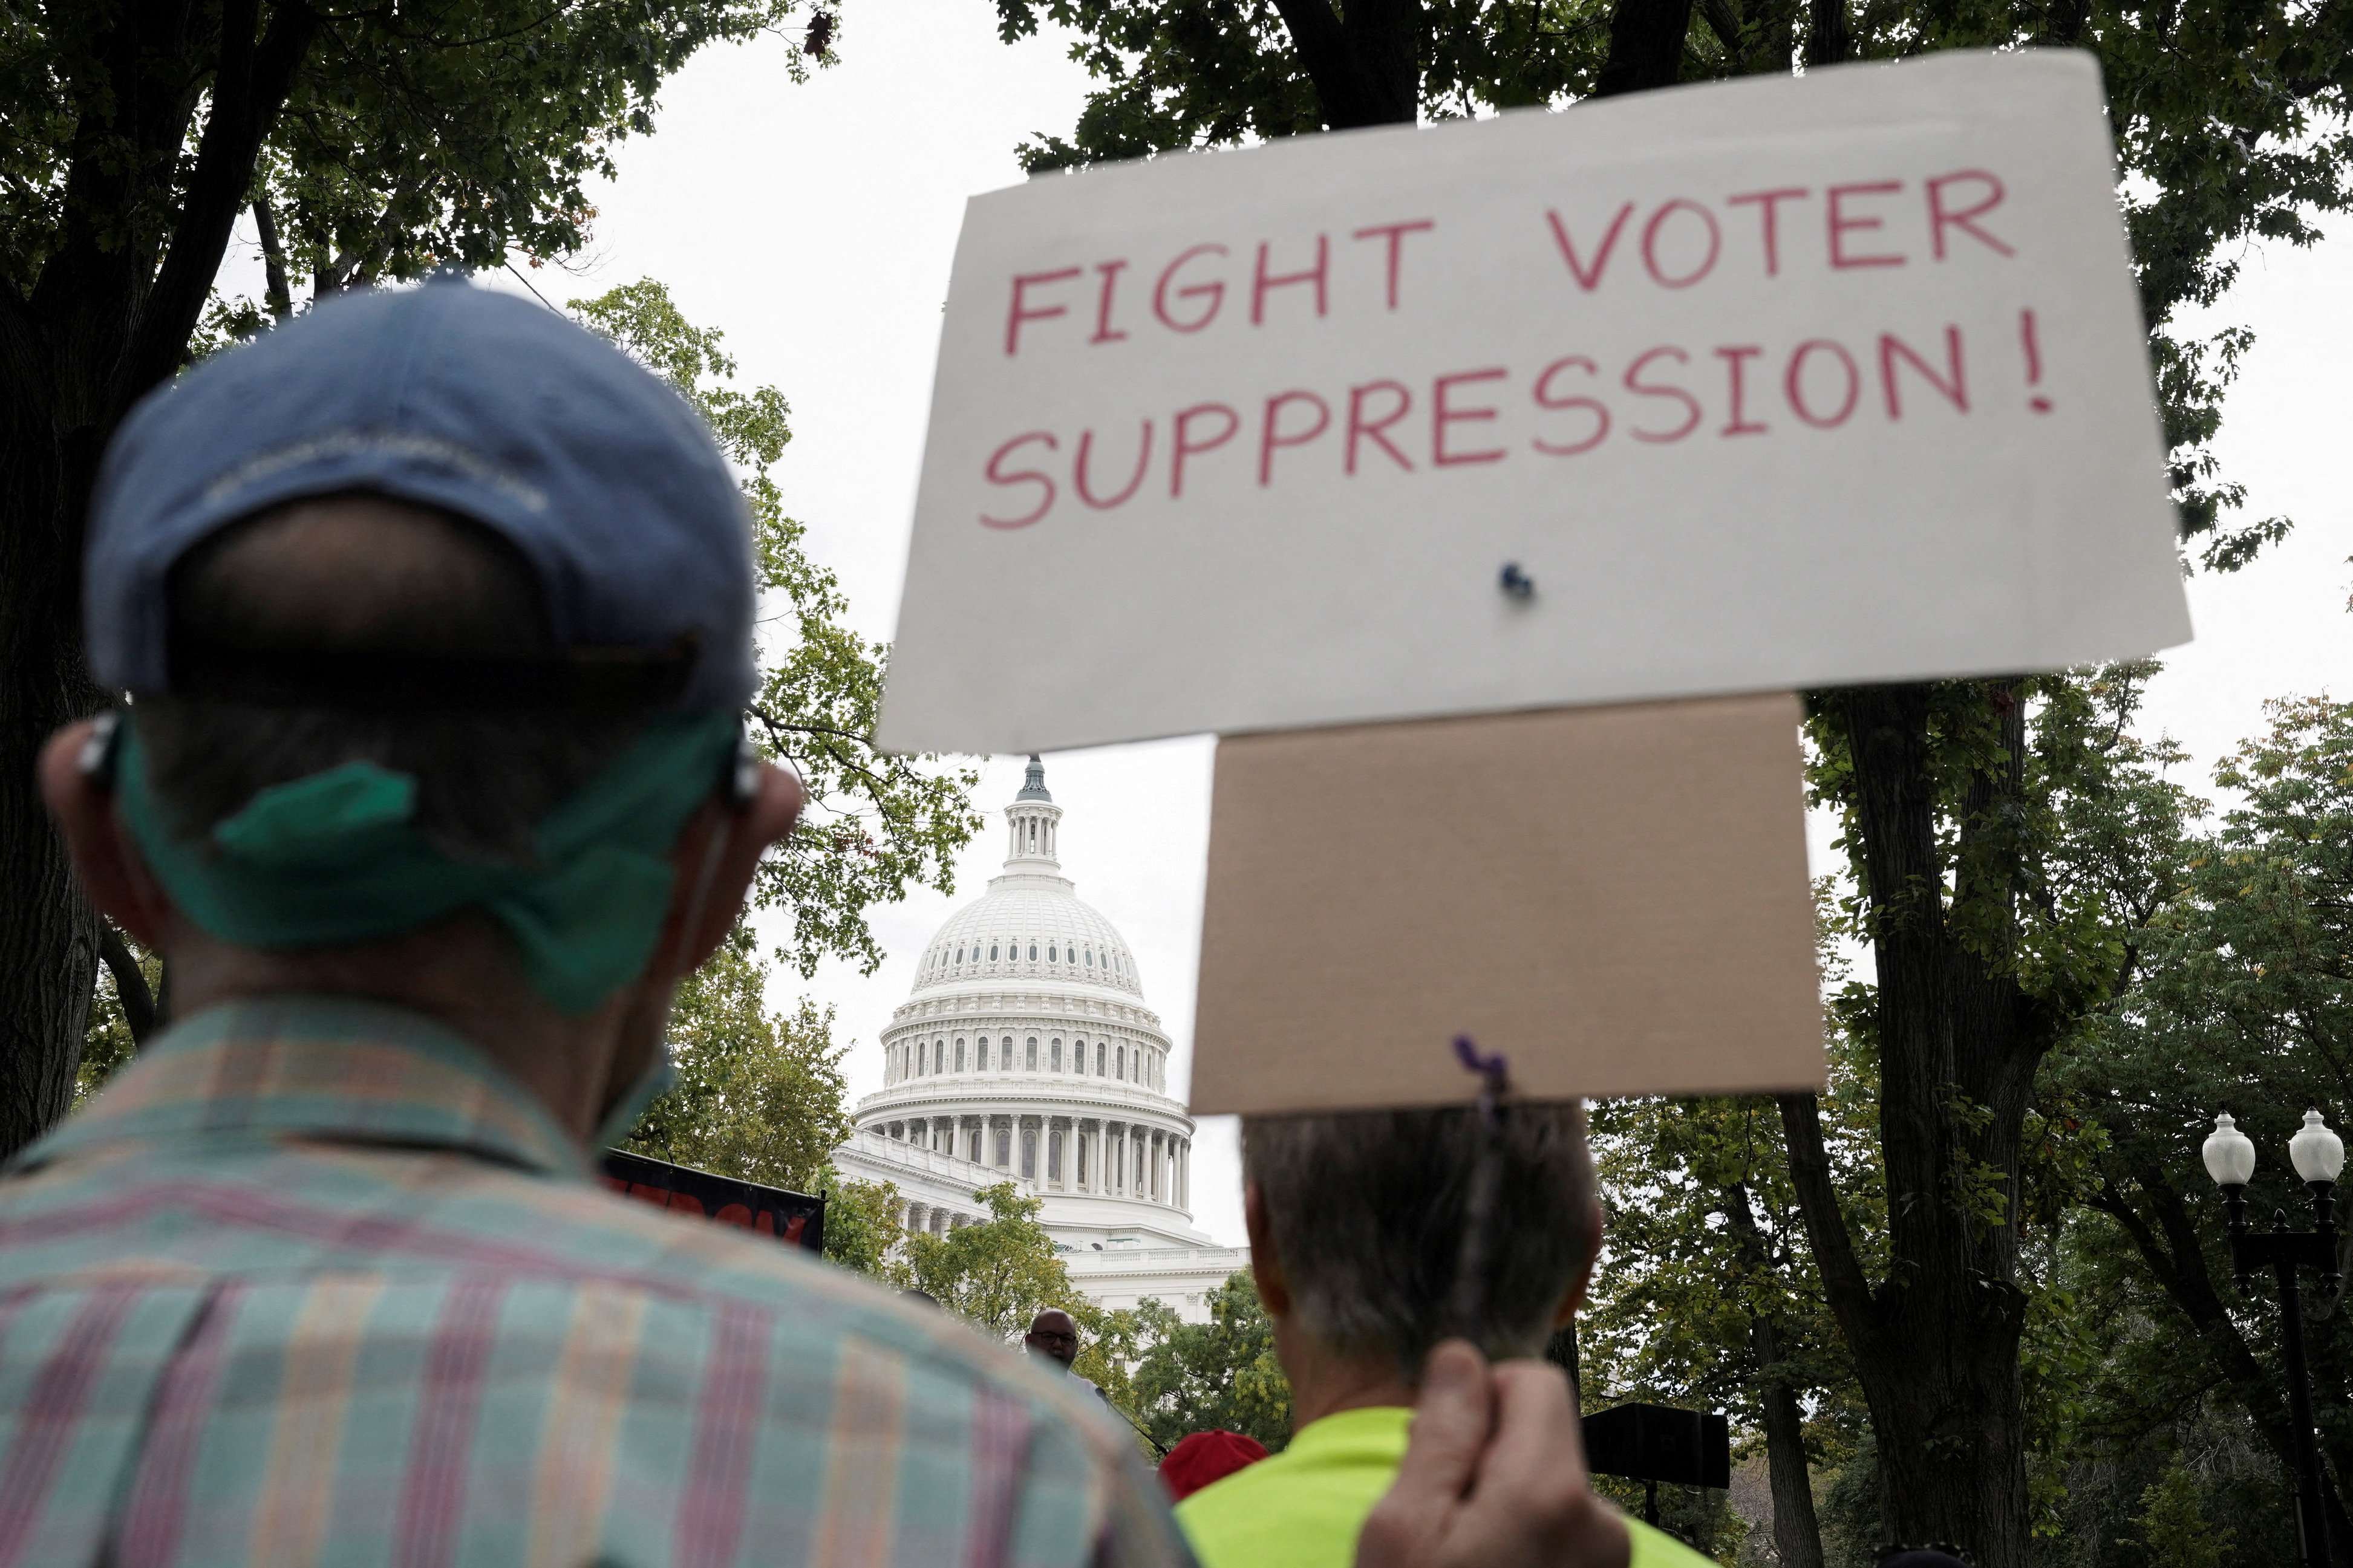 Voting rights activists rally in Washington